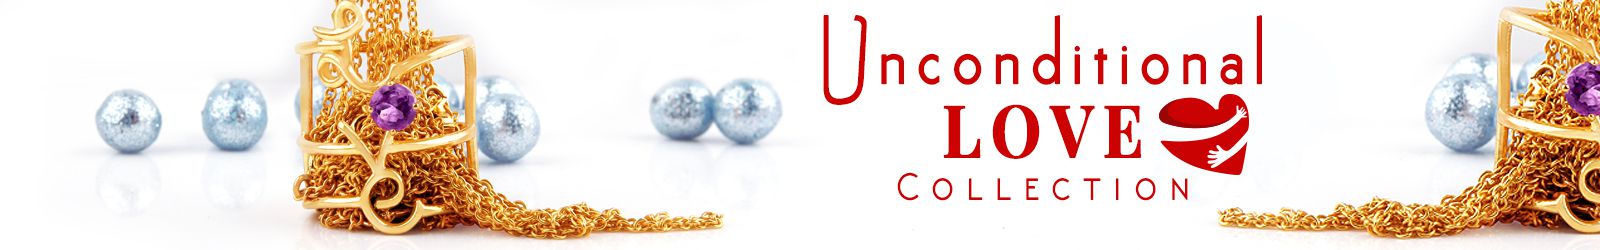 Wholesale Unconditional Love Jewelry Collection